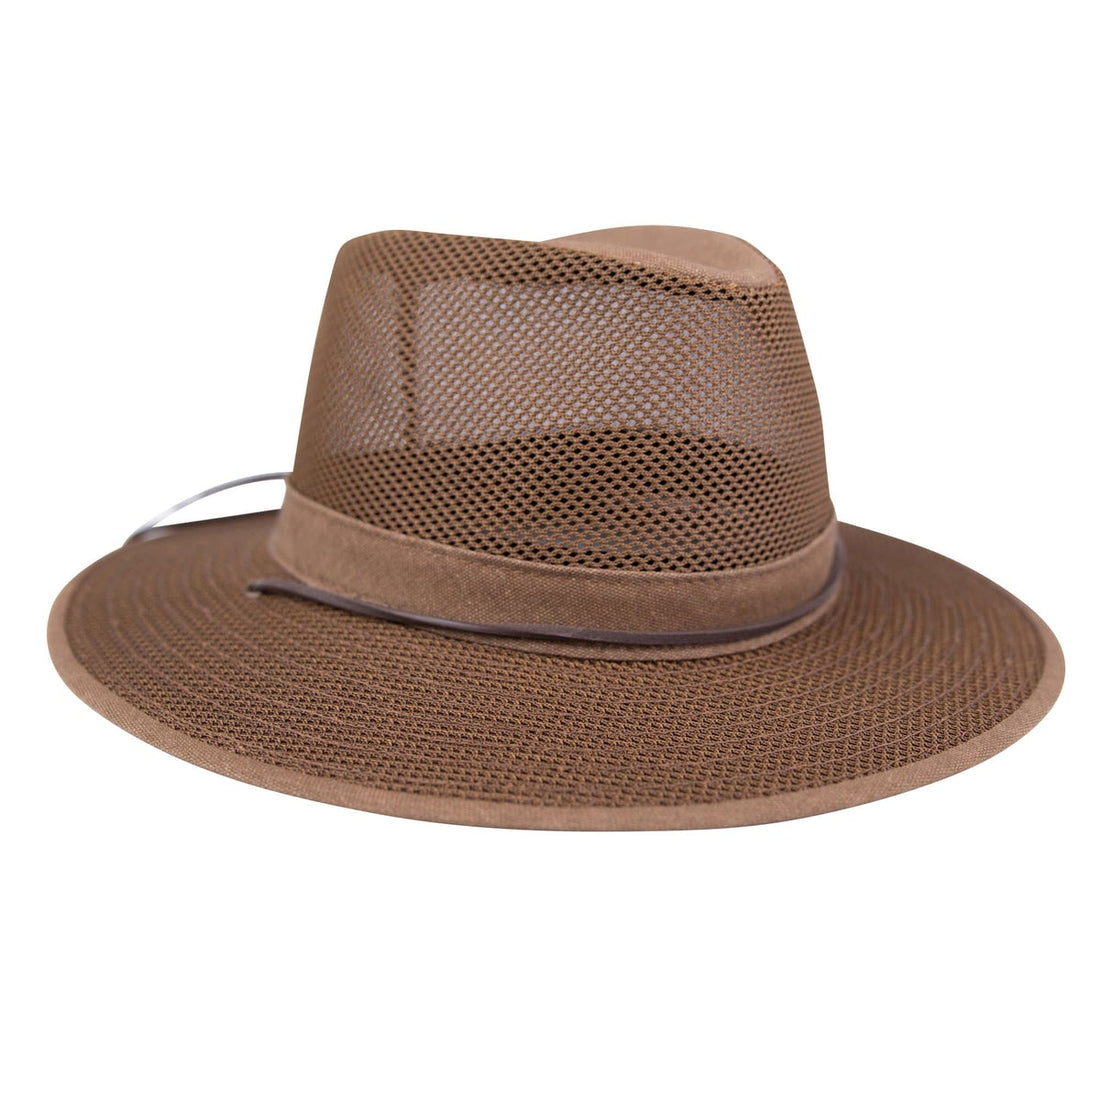 Made in the USA Spotlight: Warm Weather Highwayman Hat